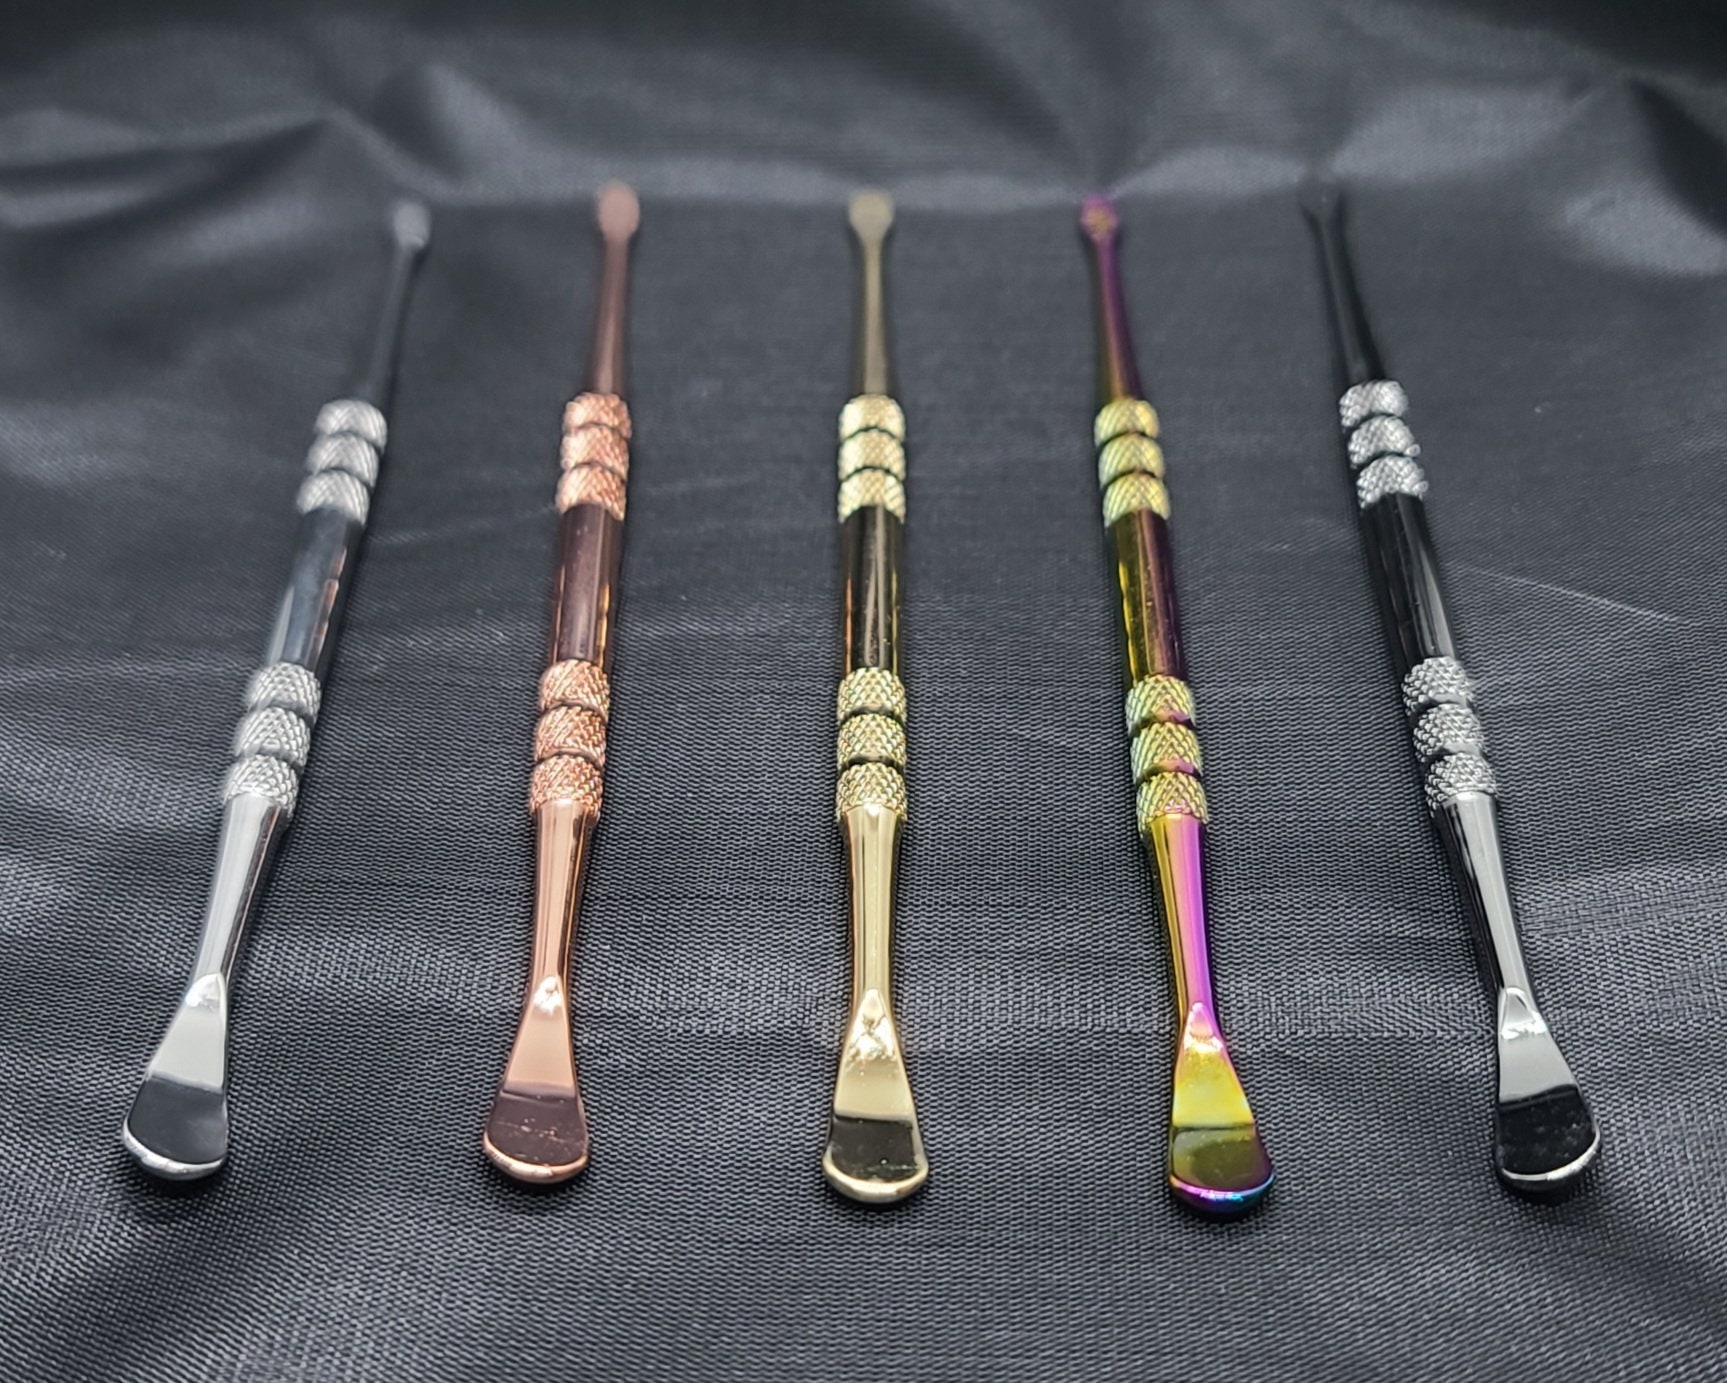 .com: 6 Pieces Wax Carving Tool Set - Rainbow Stainless